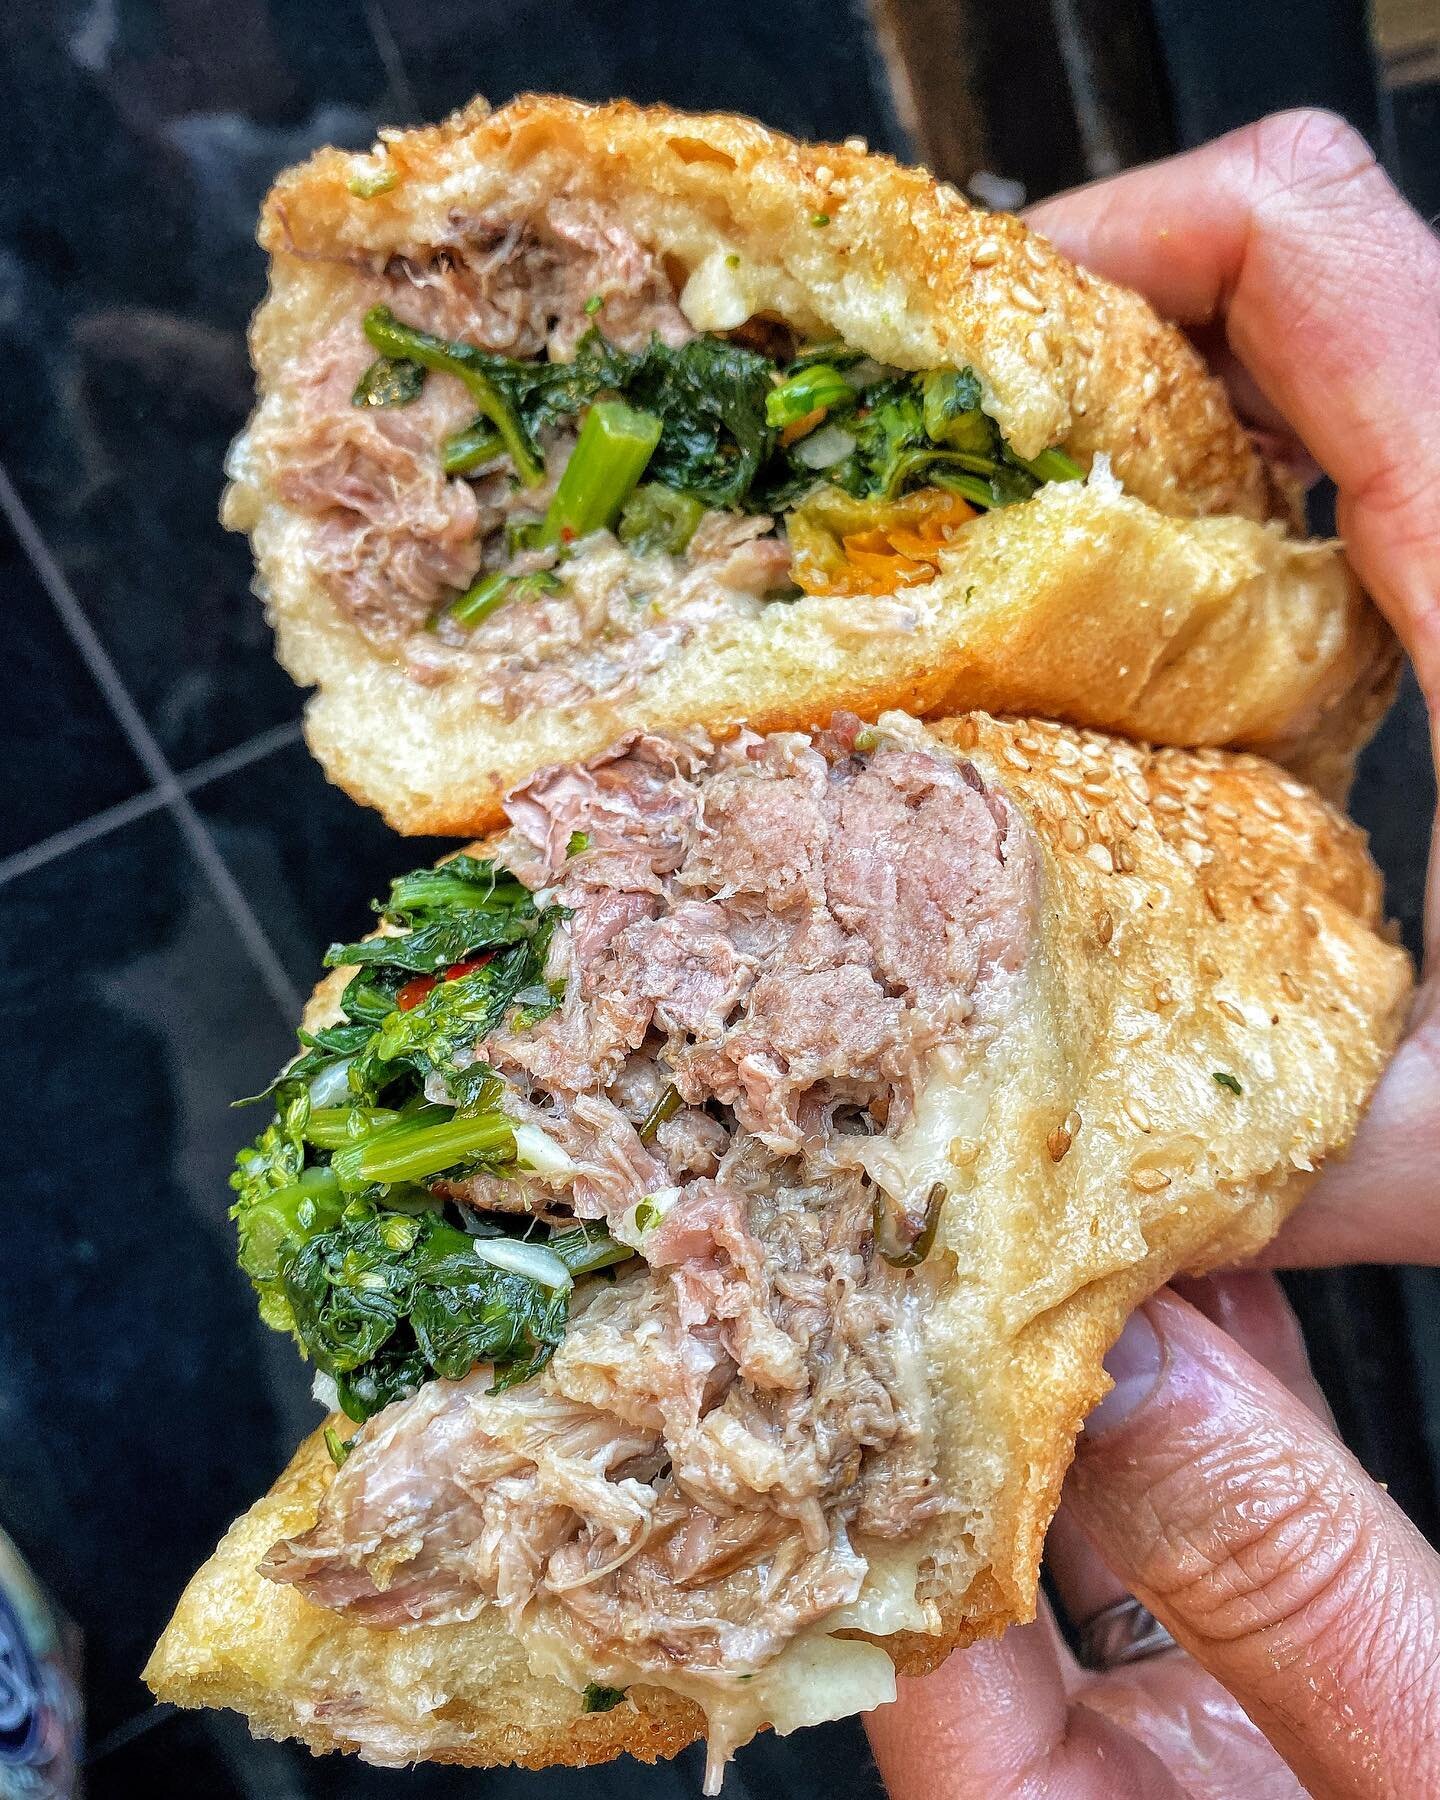 All you ever need is our ROAST PORK SANDWICH! 😎
#FEDOROFFS
🍖 On MONDAYS, get a medium ROAST PORK SANDWICH for only $6.95
‼️ WILLIAMSBURG LOCATION, UNTIL SOLD OUT‼️
_________________
📦 NATIONWIDE SHIPPING available via @GOLDBELLY‼️
🔗 Order ONLINE 